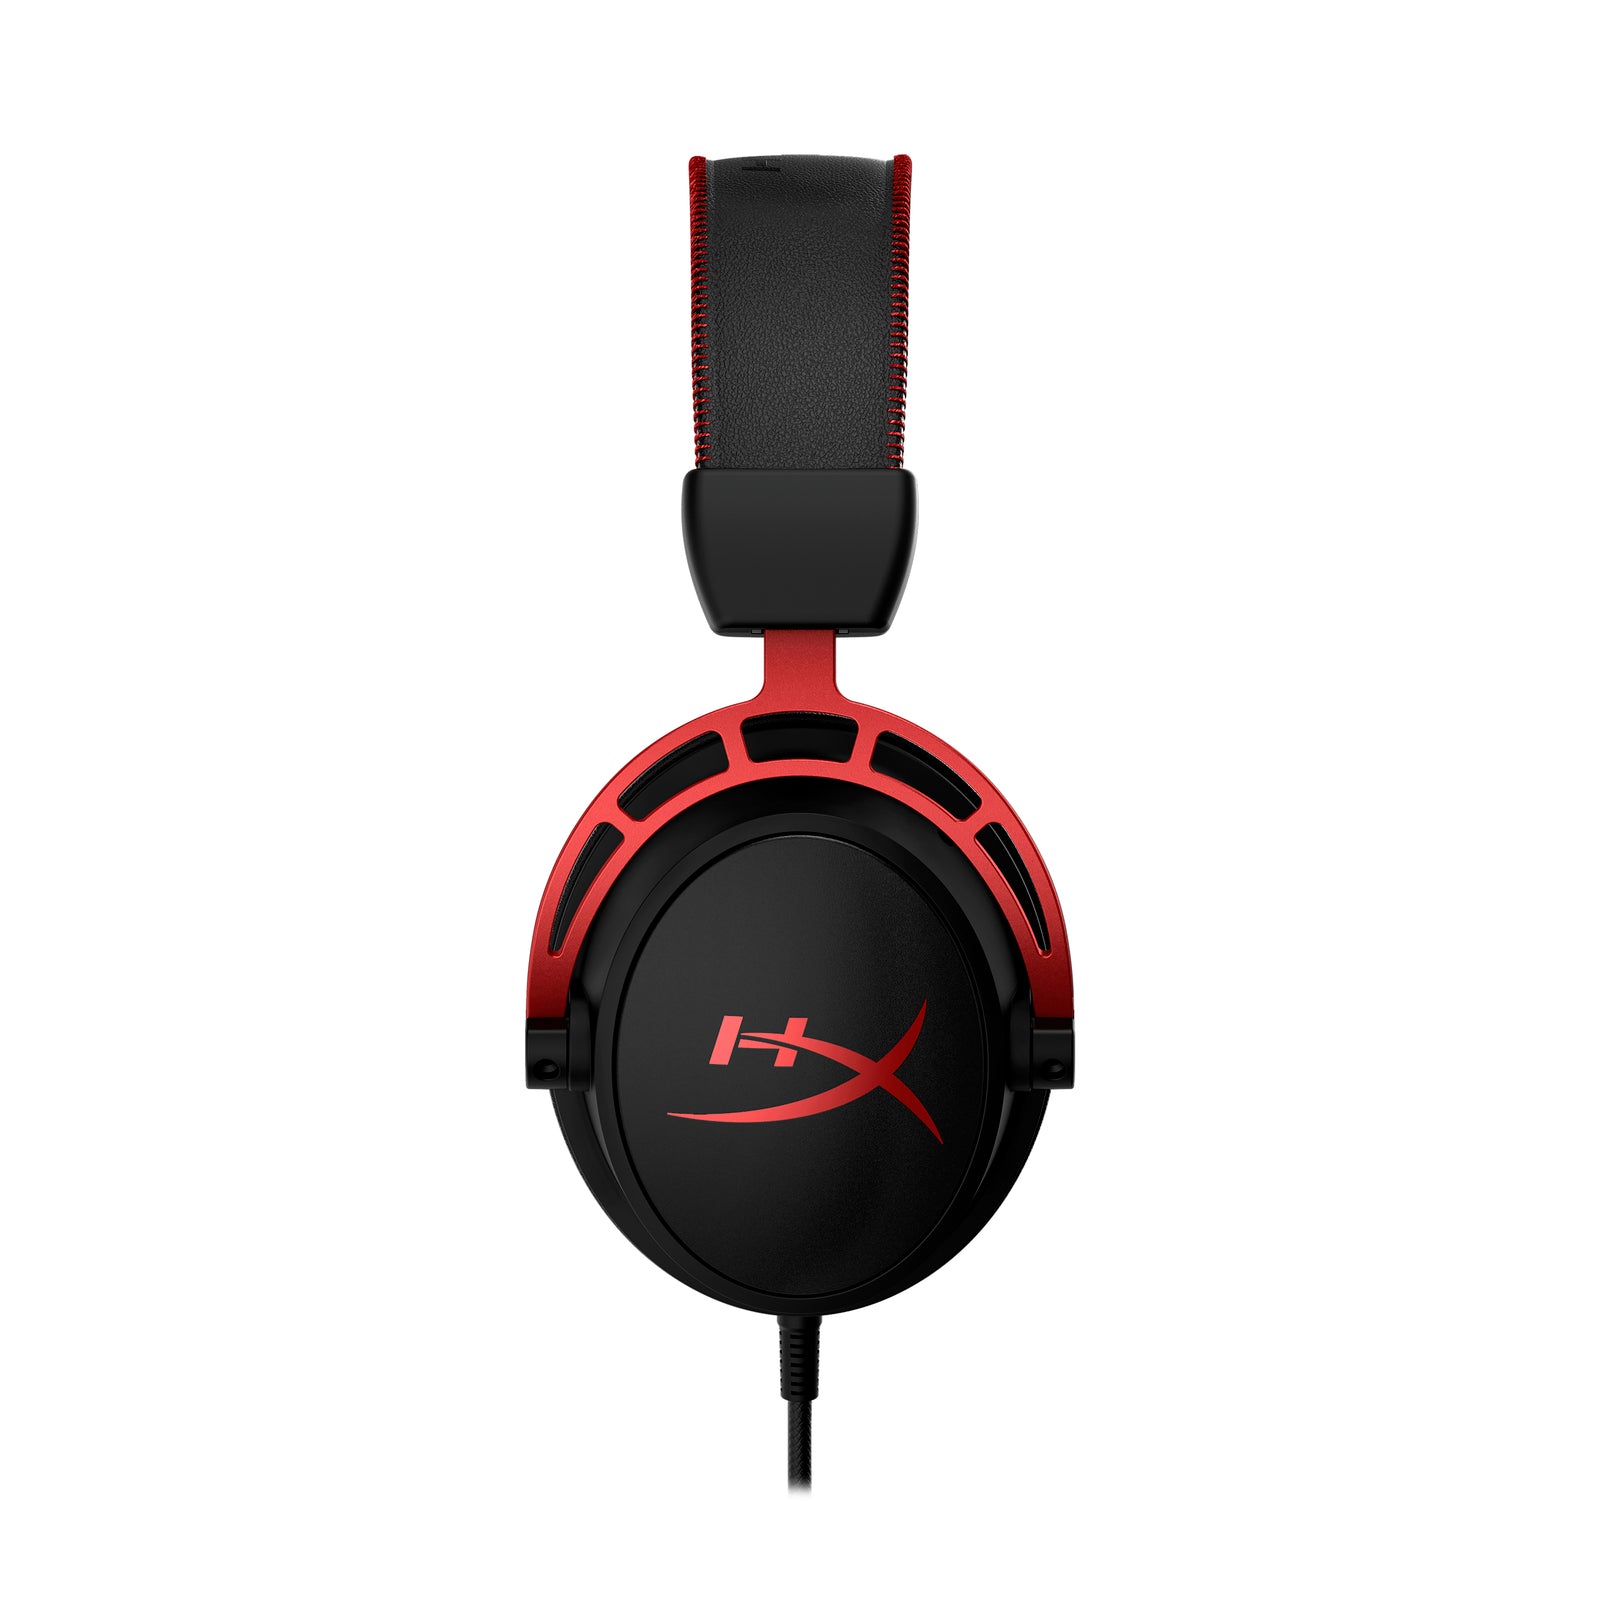  HyperX Cloud Alpha Wireless - Gaming Headset for PC, 300-hour  battery life, DTS Headphone:X Spatial Audio, Memory foam, Dual Chamber  Drivers, Noise-canceling mic, Durable aluminum frame,Red : Video Games